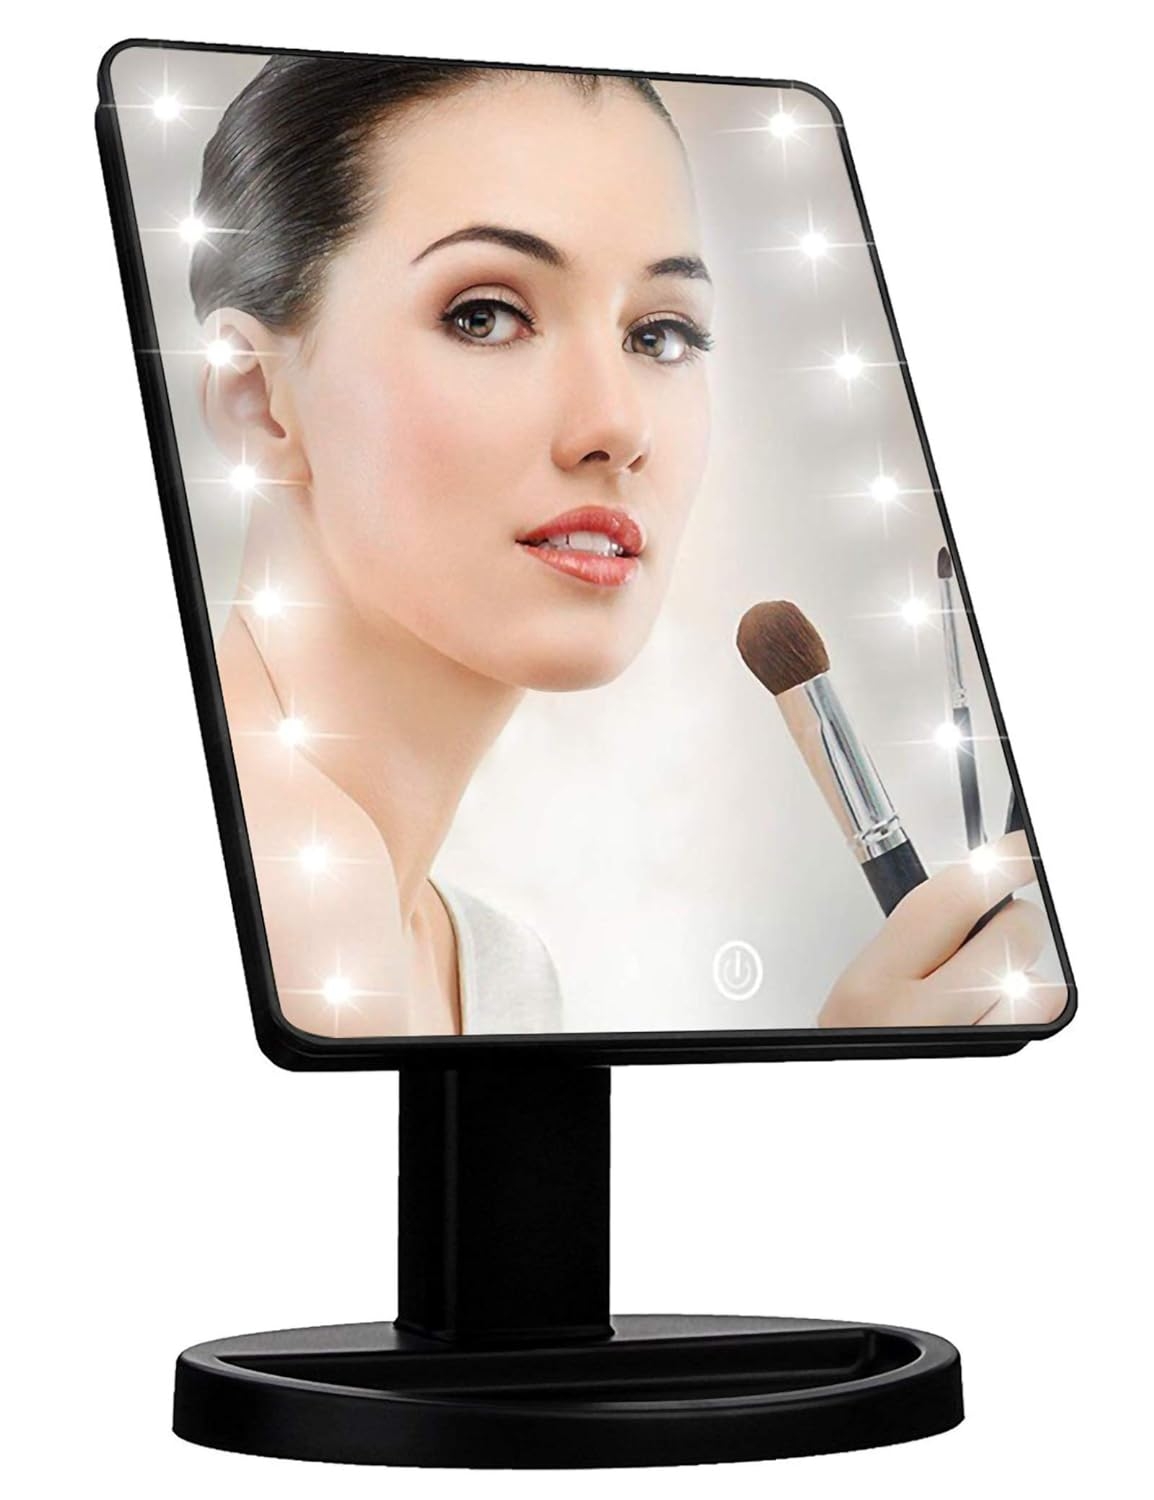 Lighted Vanity Makeup Mirror with 16 Led Lights 180 Degree Free Rotation Touch Screen Adjusted Brightness Battery USB Dual Supply Bathroom Beauty Mirror (Black)